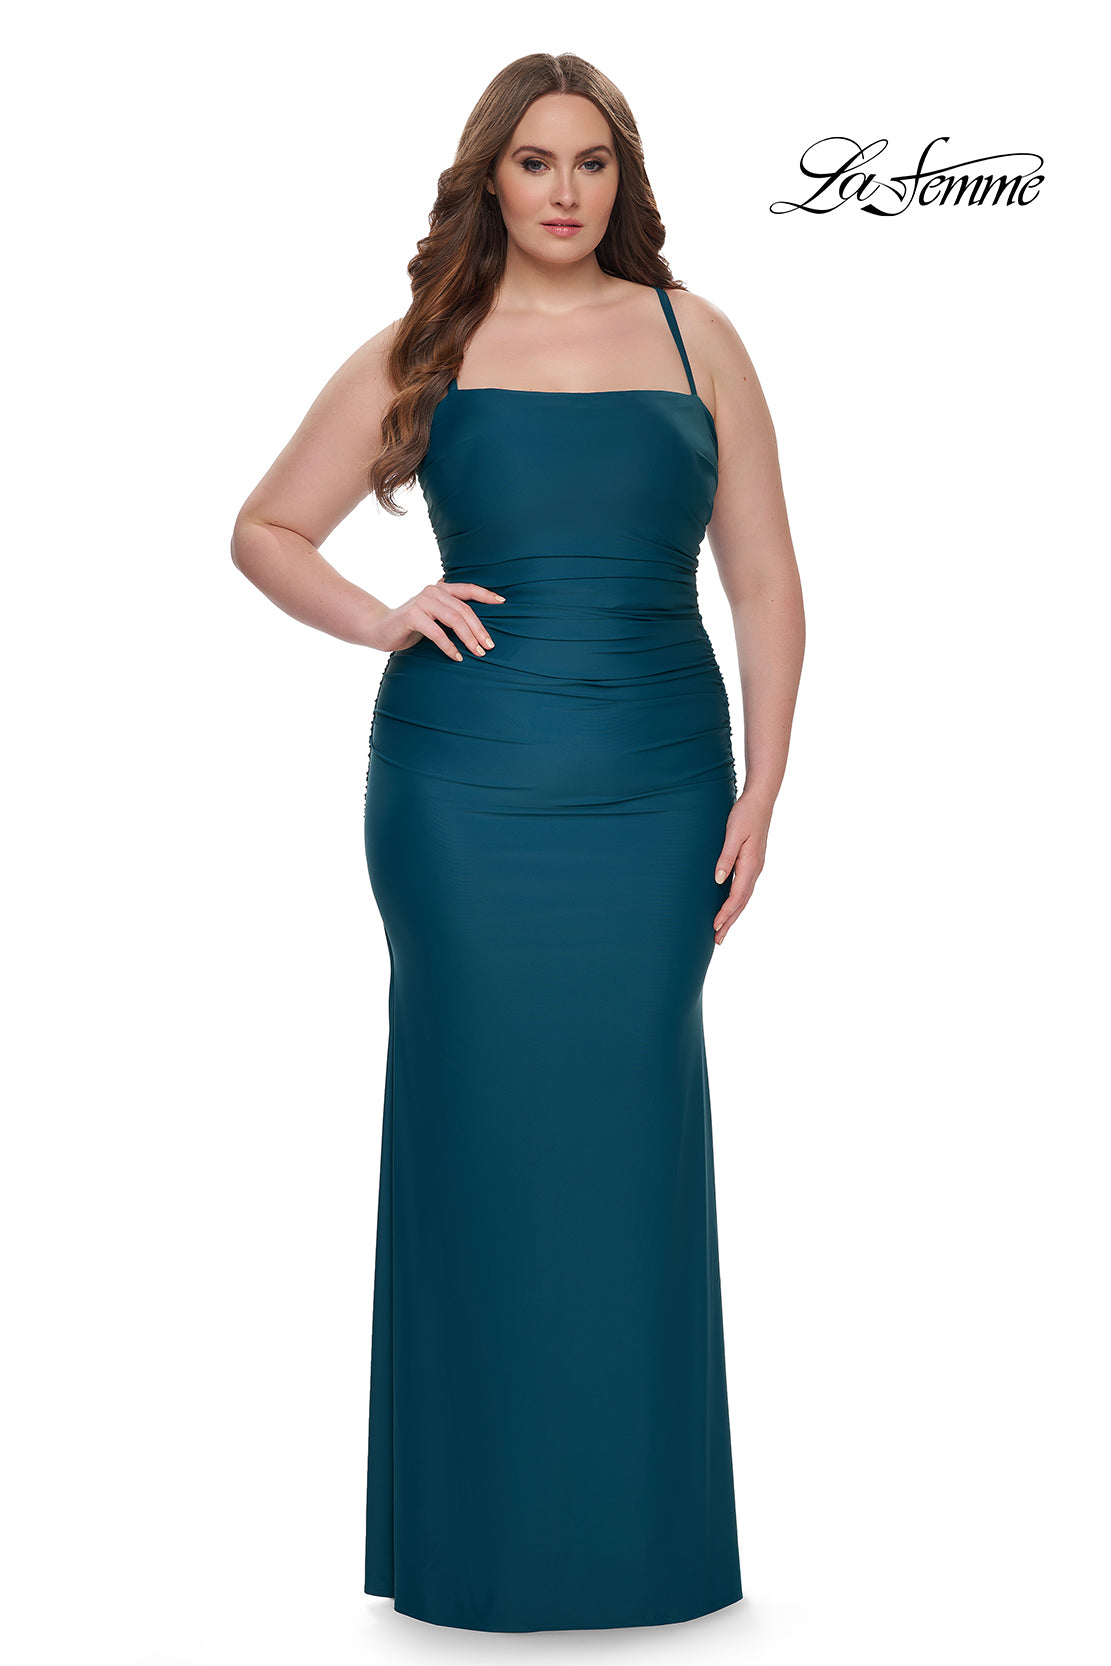 La-Femme-32195-Square-Neckline-Lace-up-Back-Ruched-Jersey-Fitted-Dark-Teal-Evening-Dress-B-Chic-Fashions-Prom-Dress